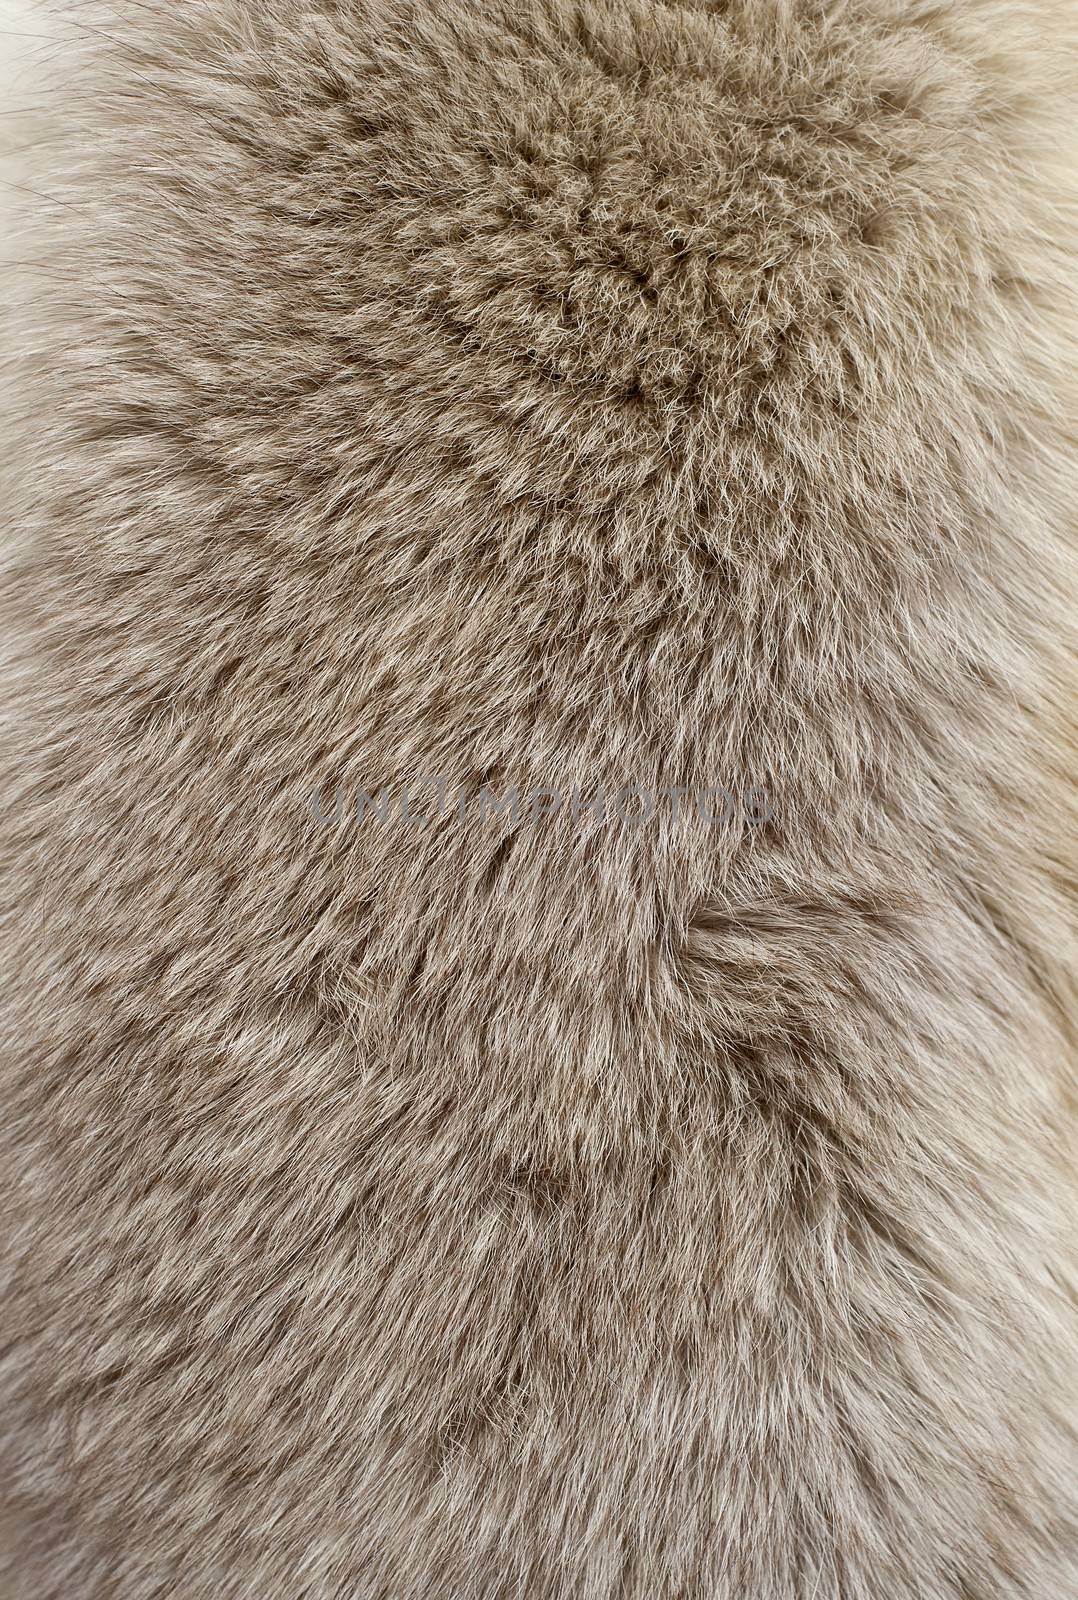 Fur texture by cla78